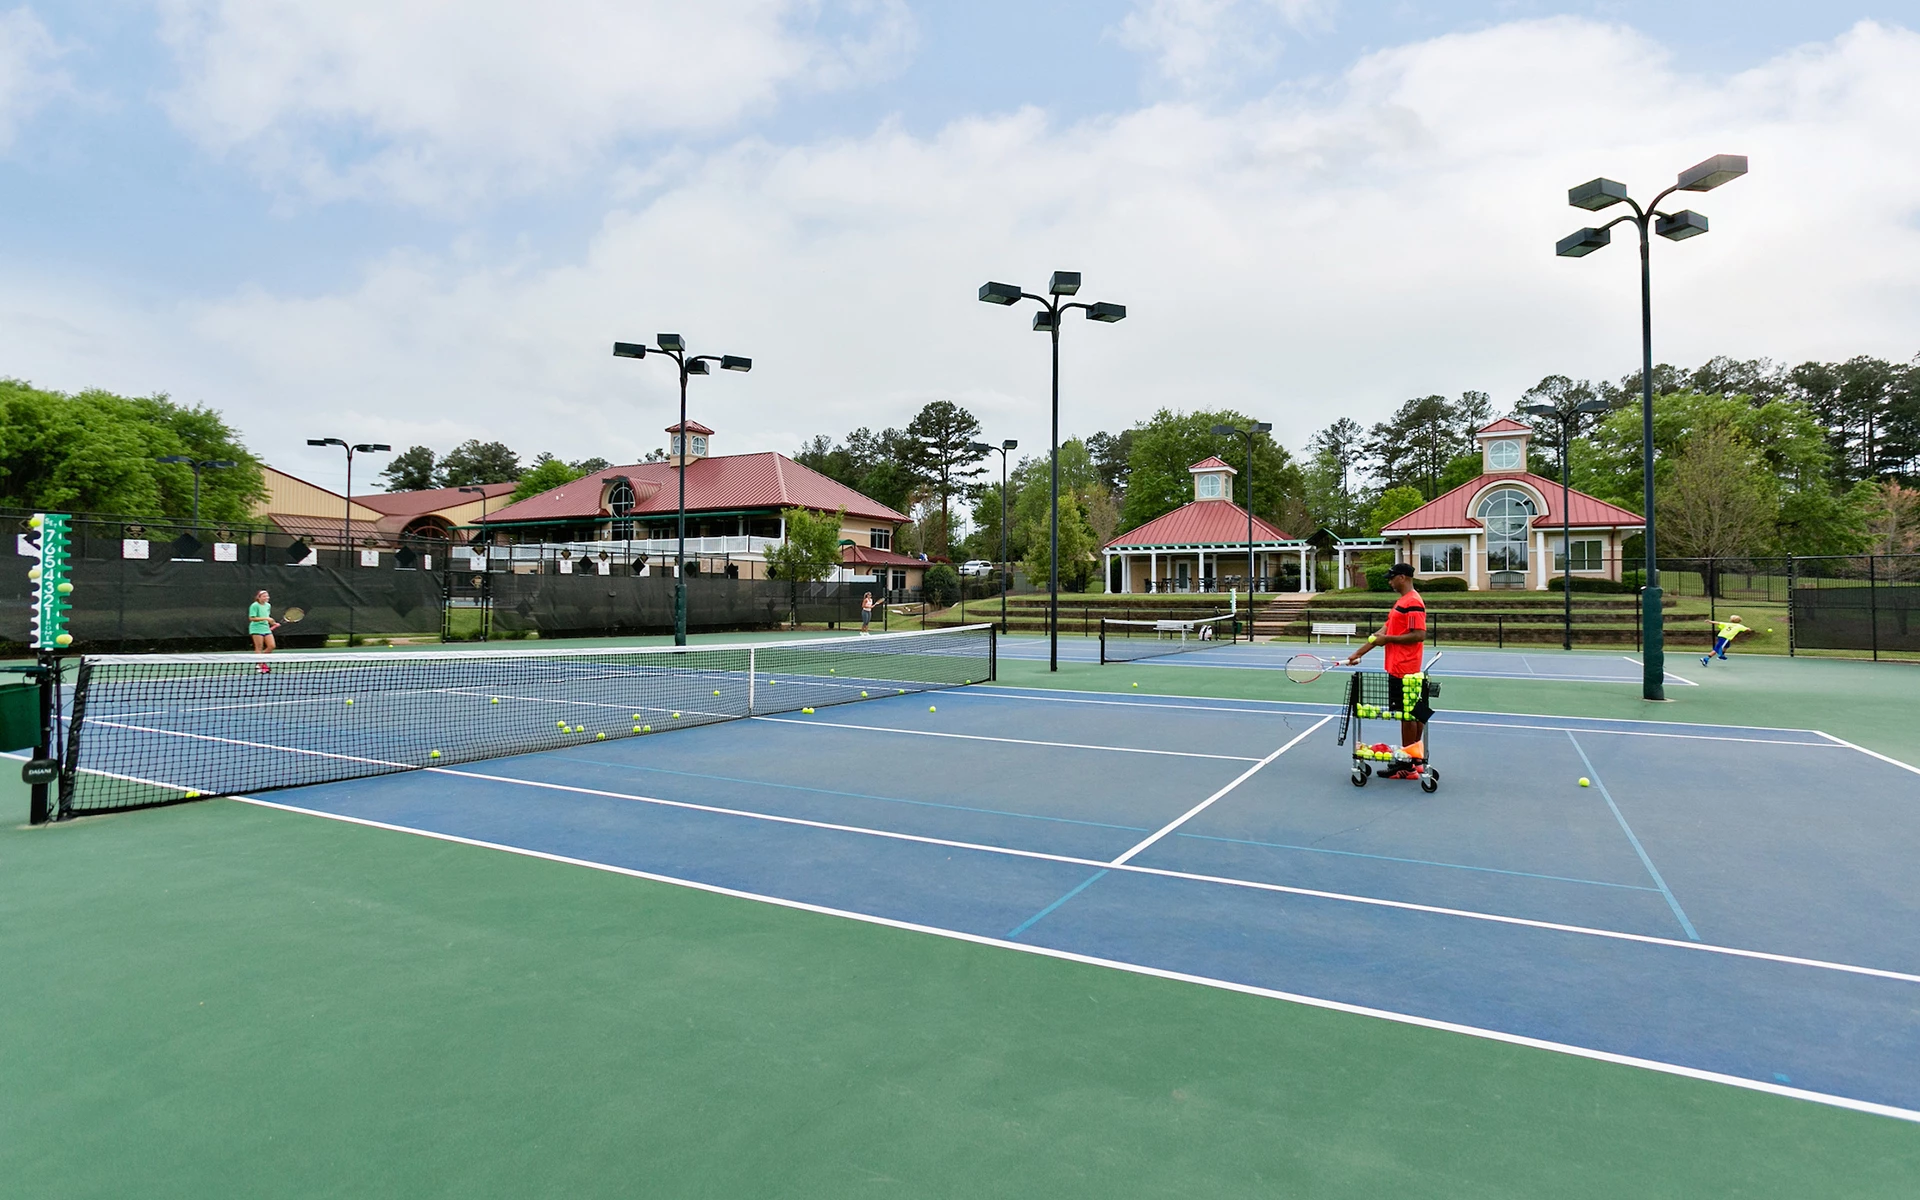 Peachtree City Tennis Center - Members playing tennis